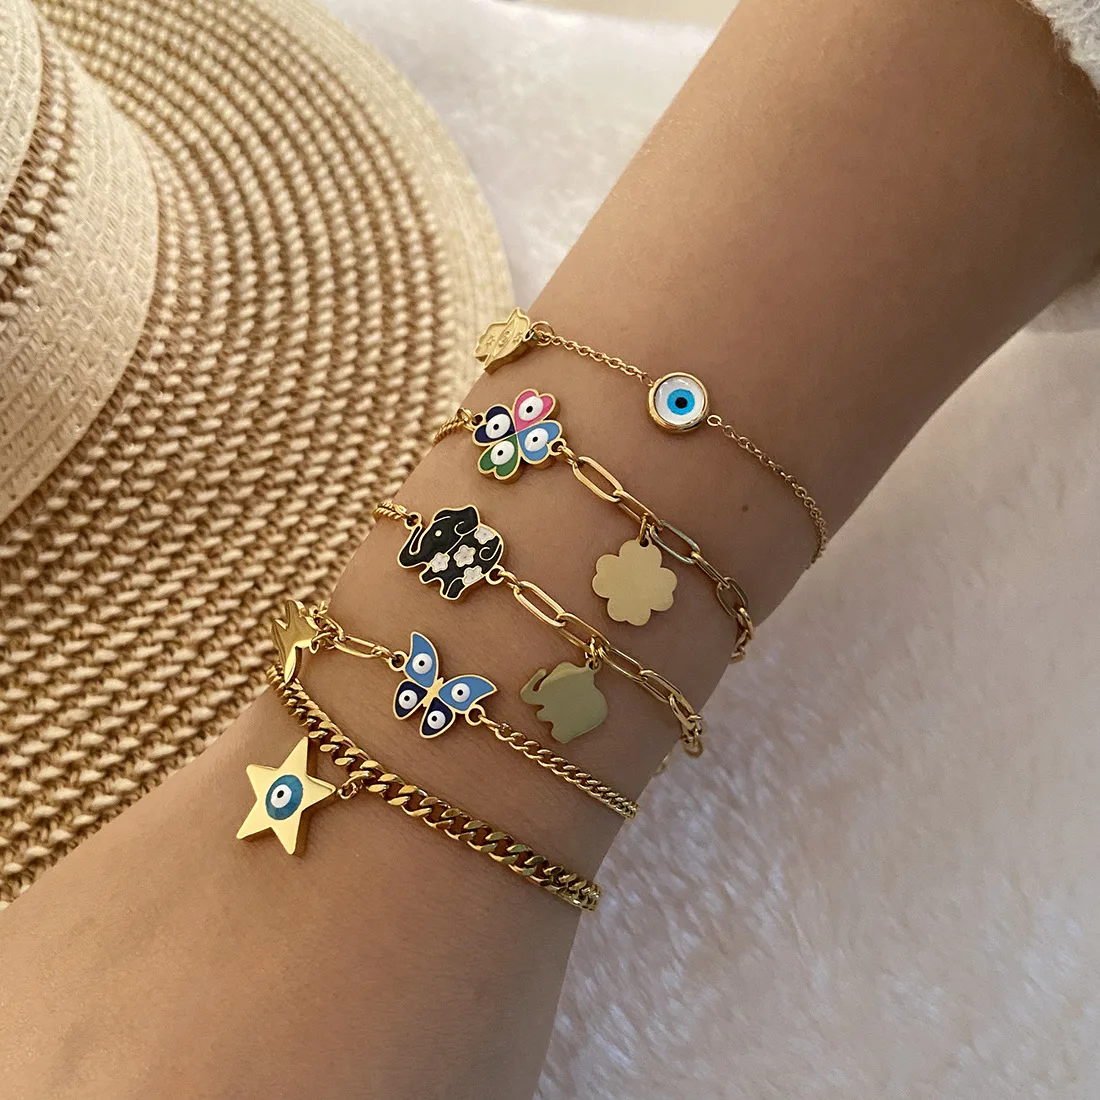 

316L Stainless Steel Eyes Butterfly Five pointed Star Charm Bracelet For Women New Trend Wrist Chain Jewelry Holiday Gift